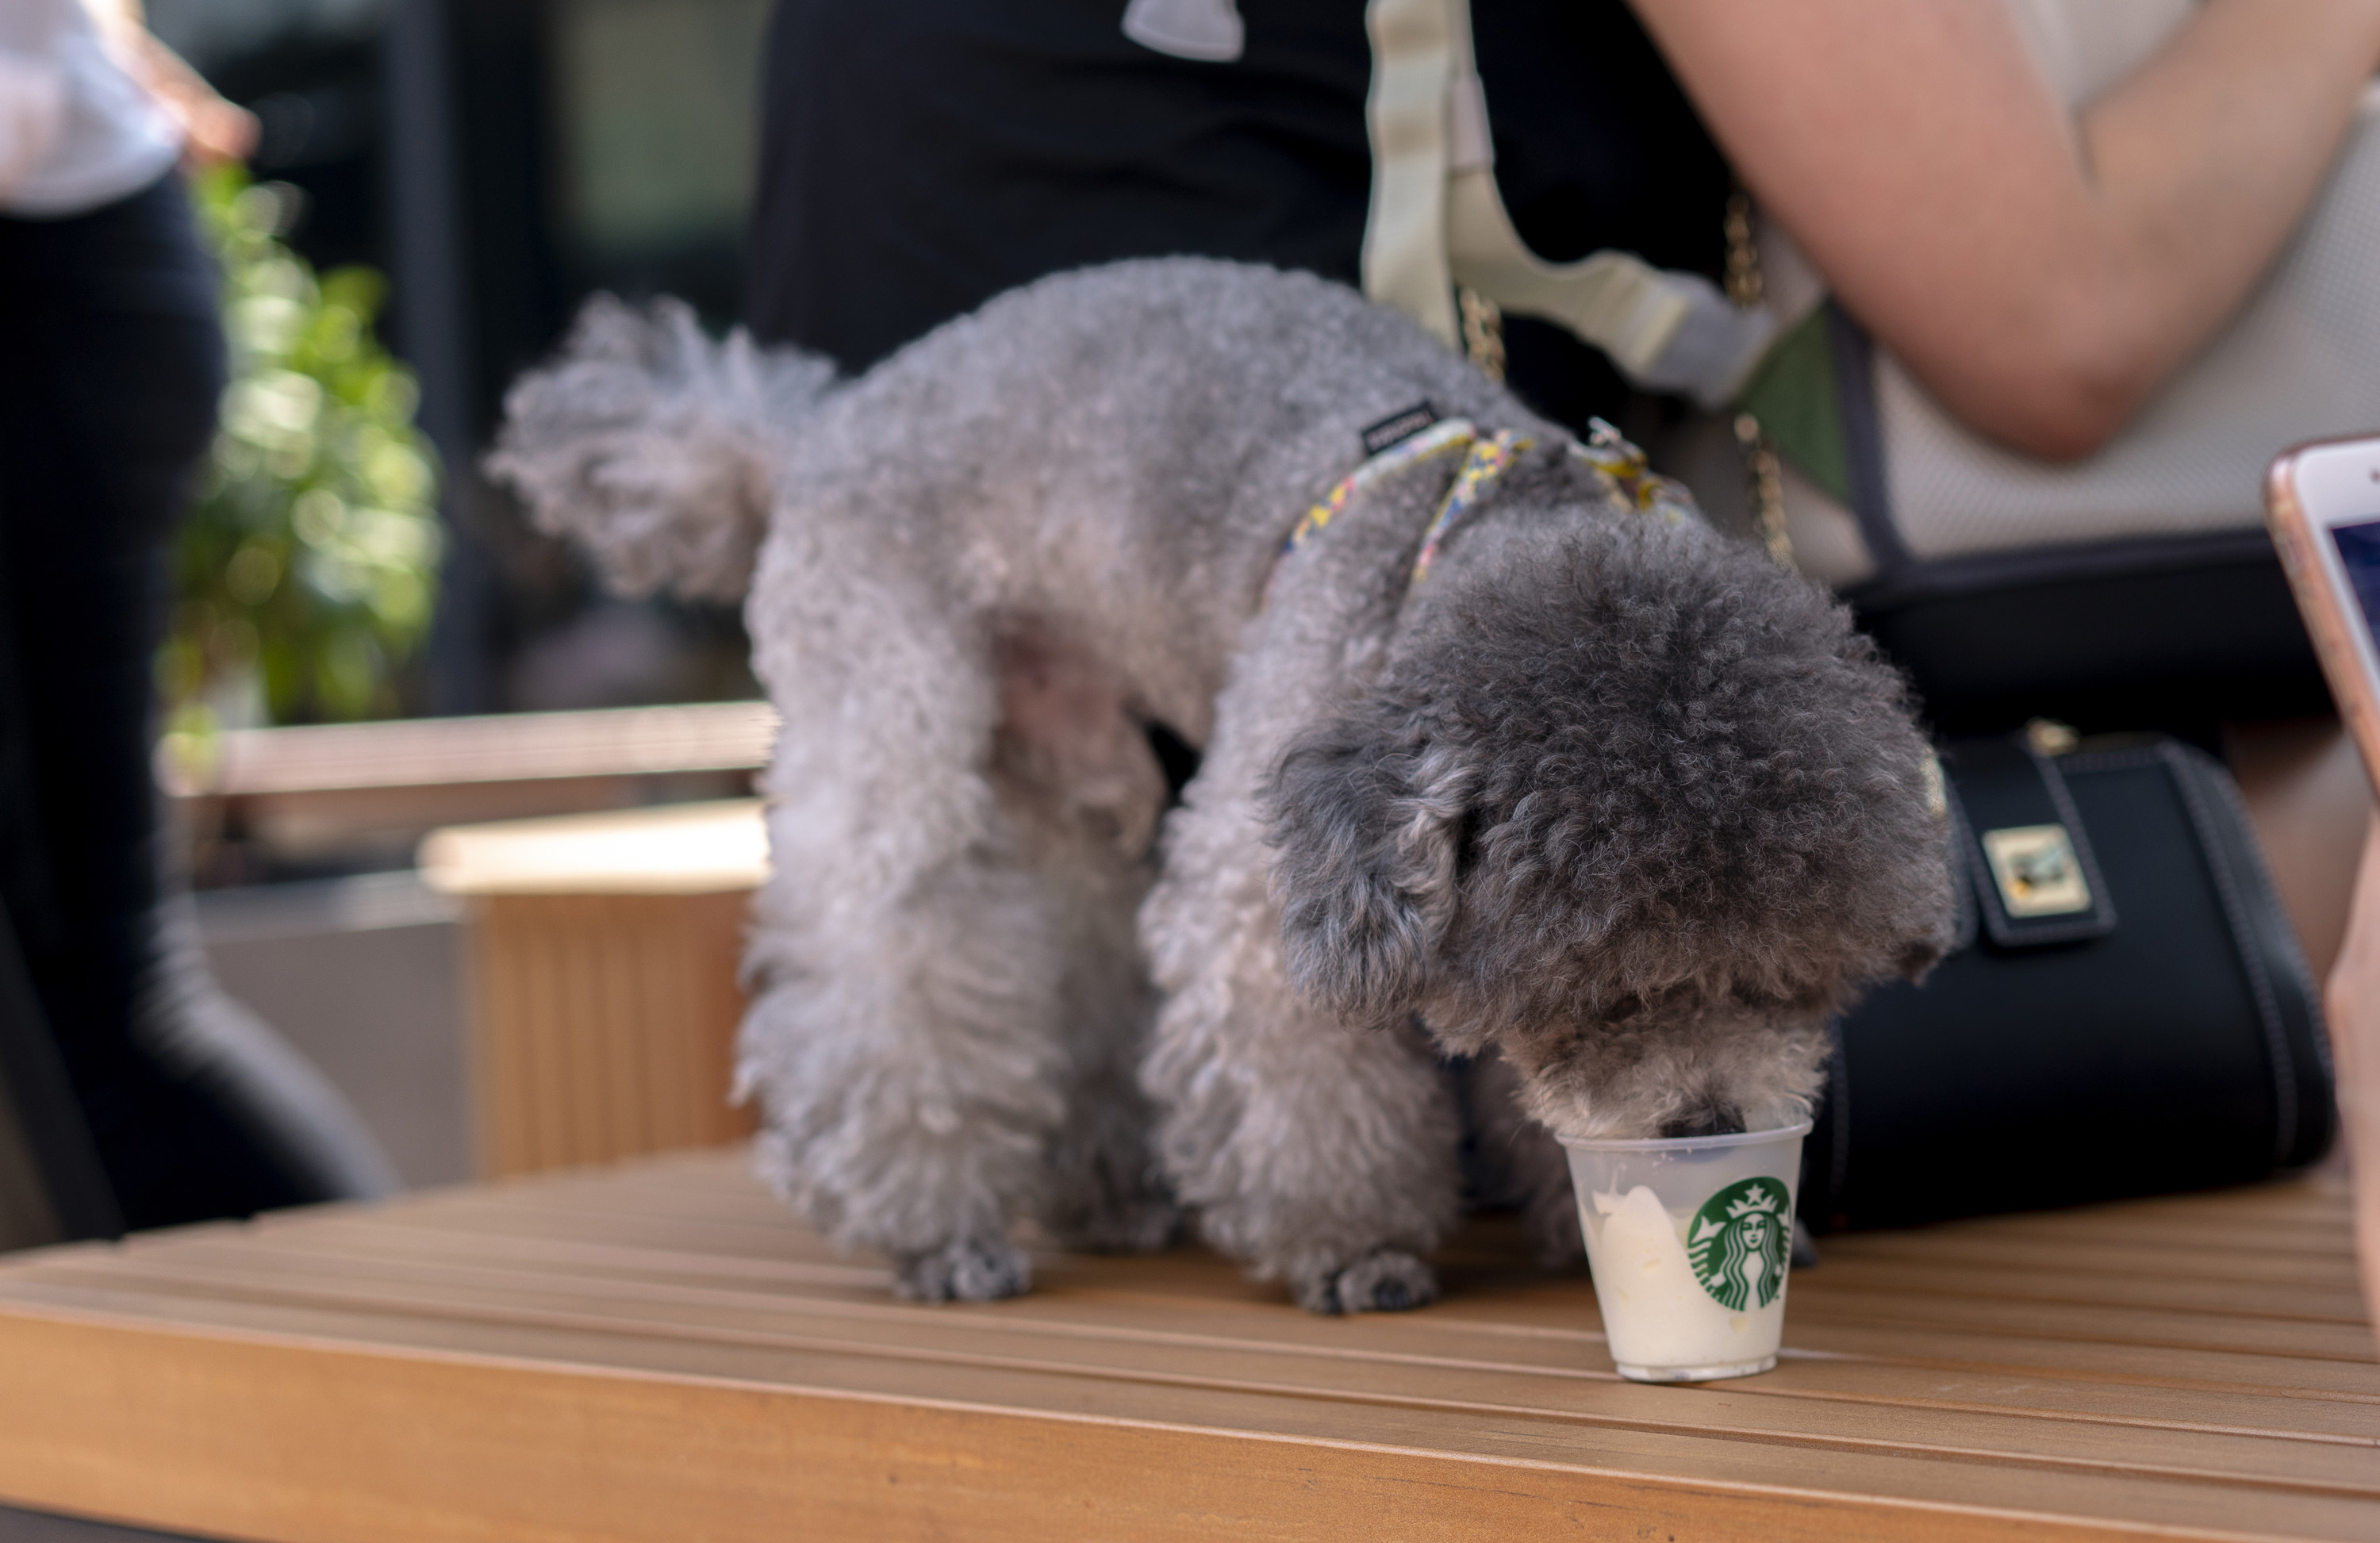 Small dog licking cream from a plastic cup marked with the Starbucks logo.